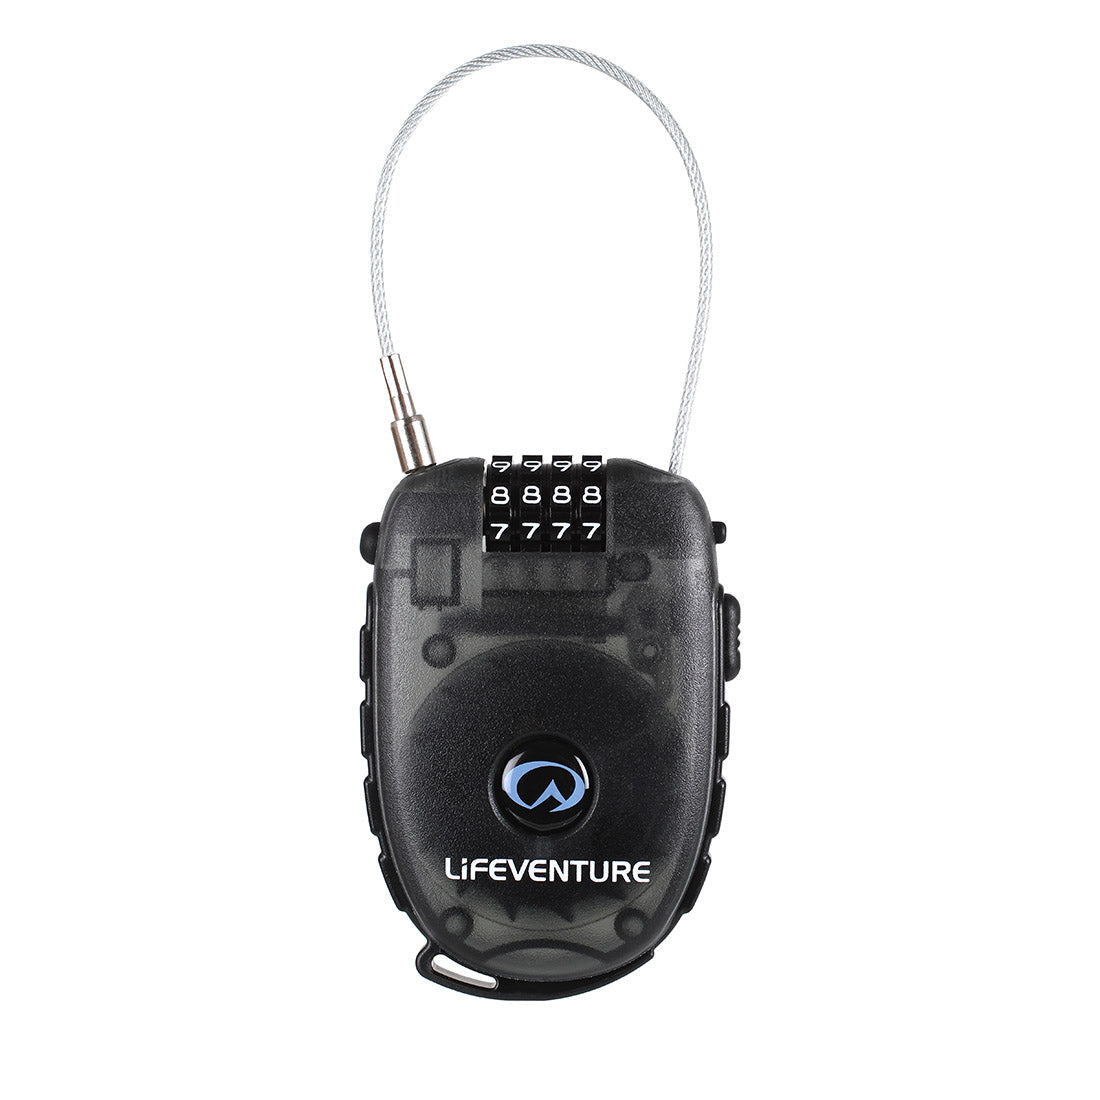 Lifeventure Sliding Cable Lock Lock with 4 Digit Code Combination